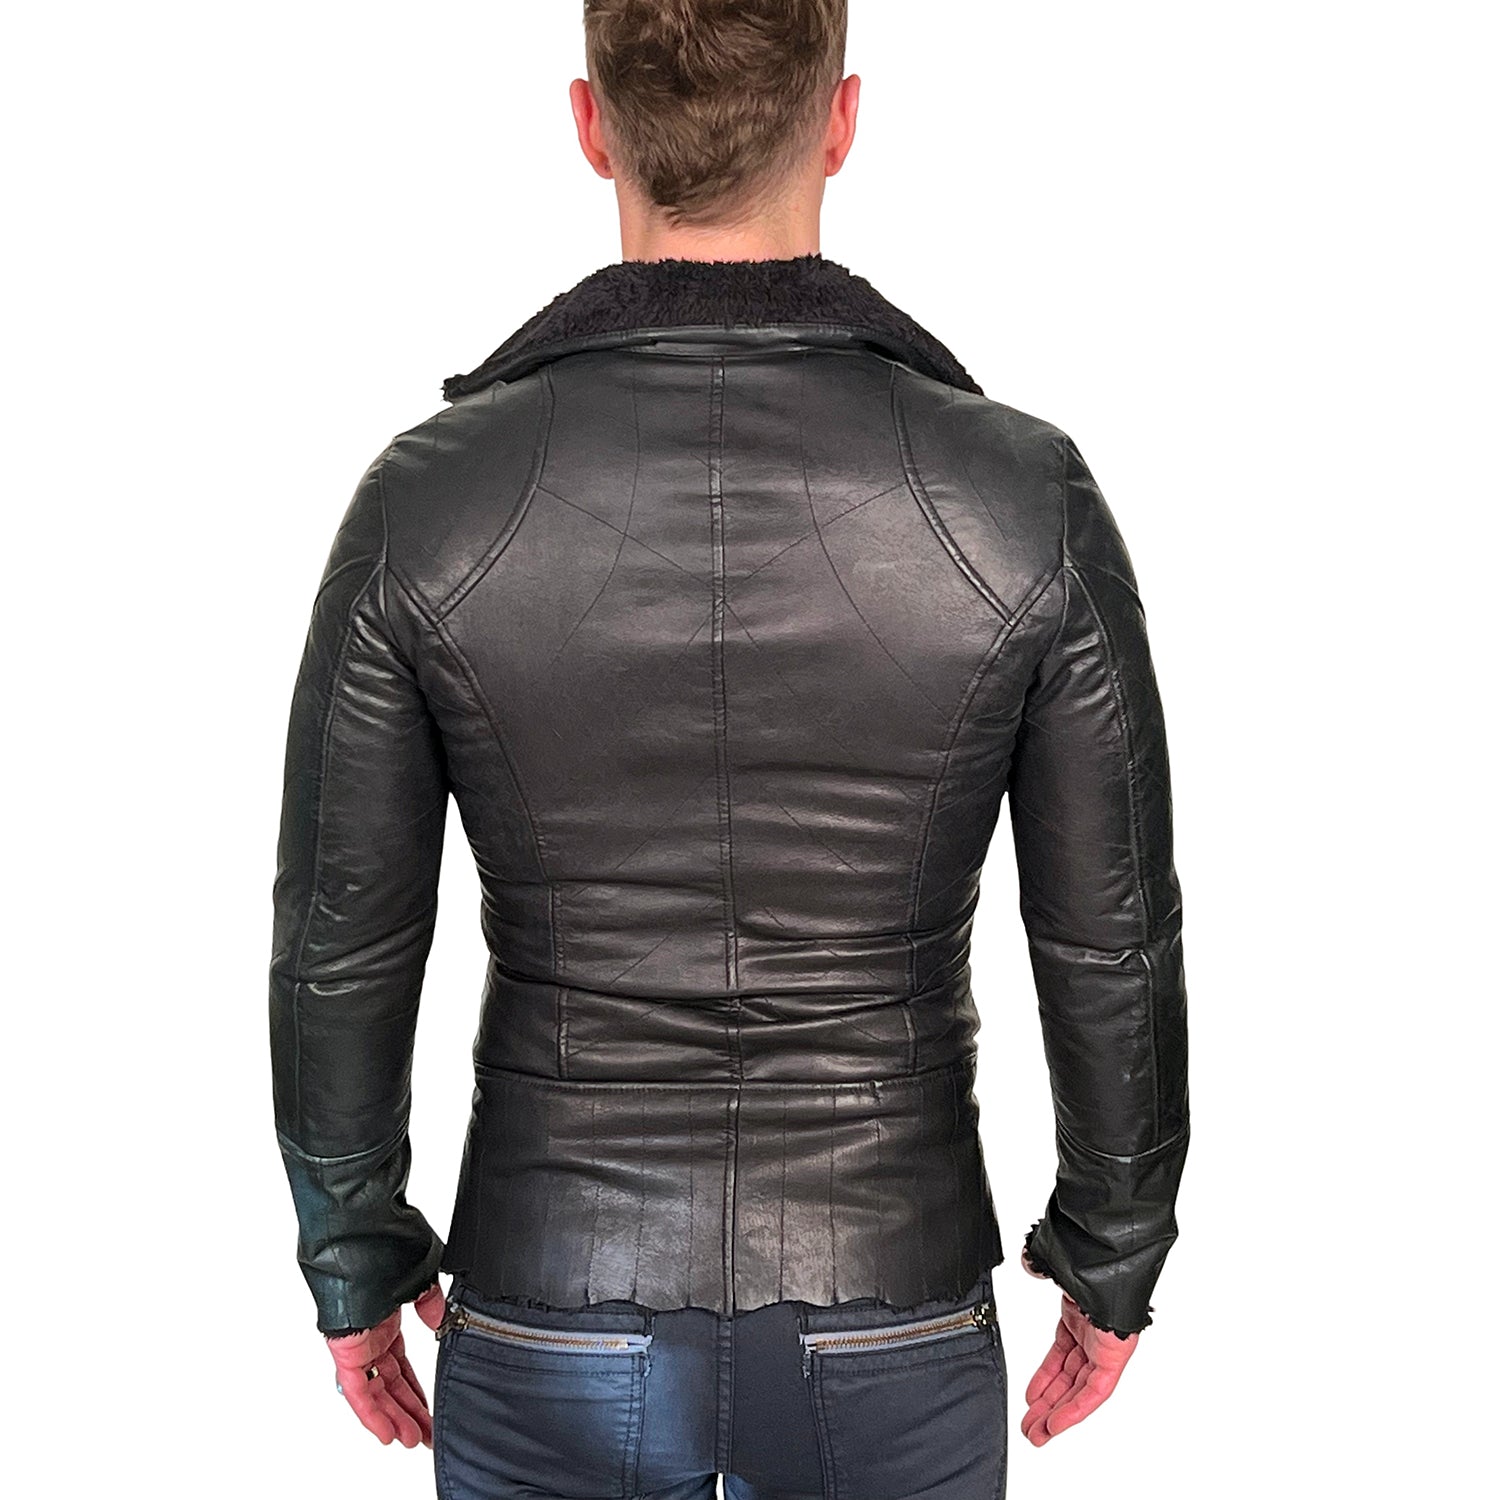 Cheap Leather Jackets. Are They Any Good? The Jacket Maker Review. - YouTube